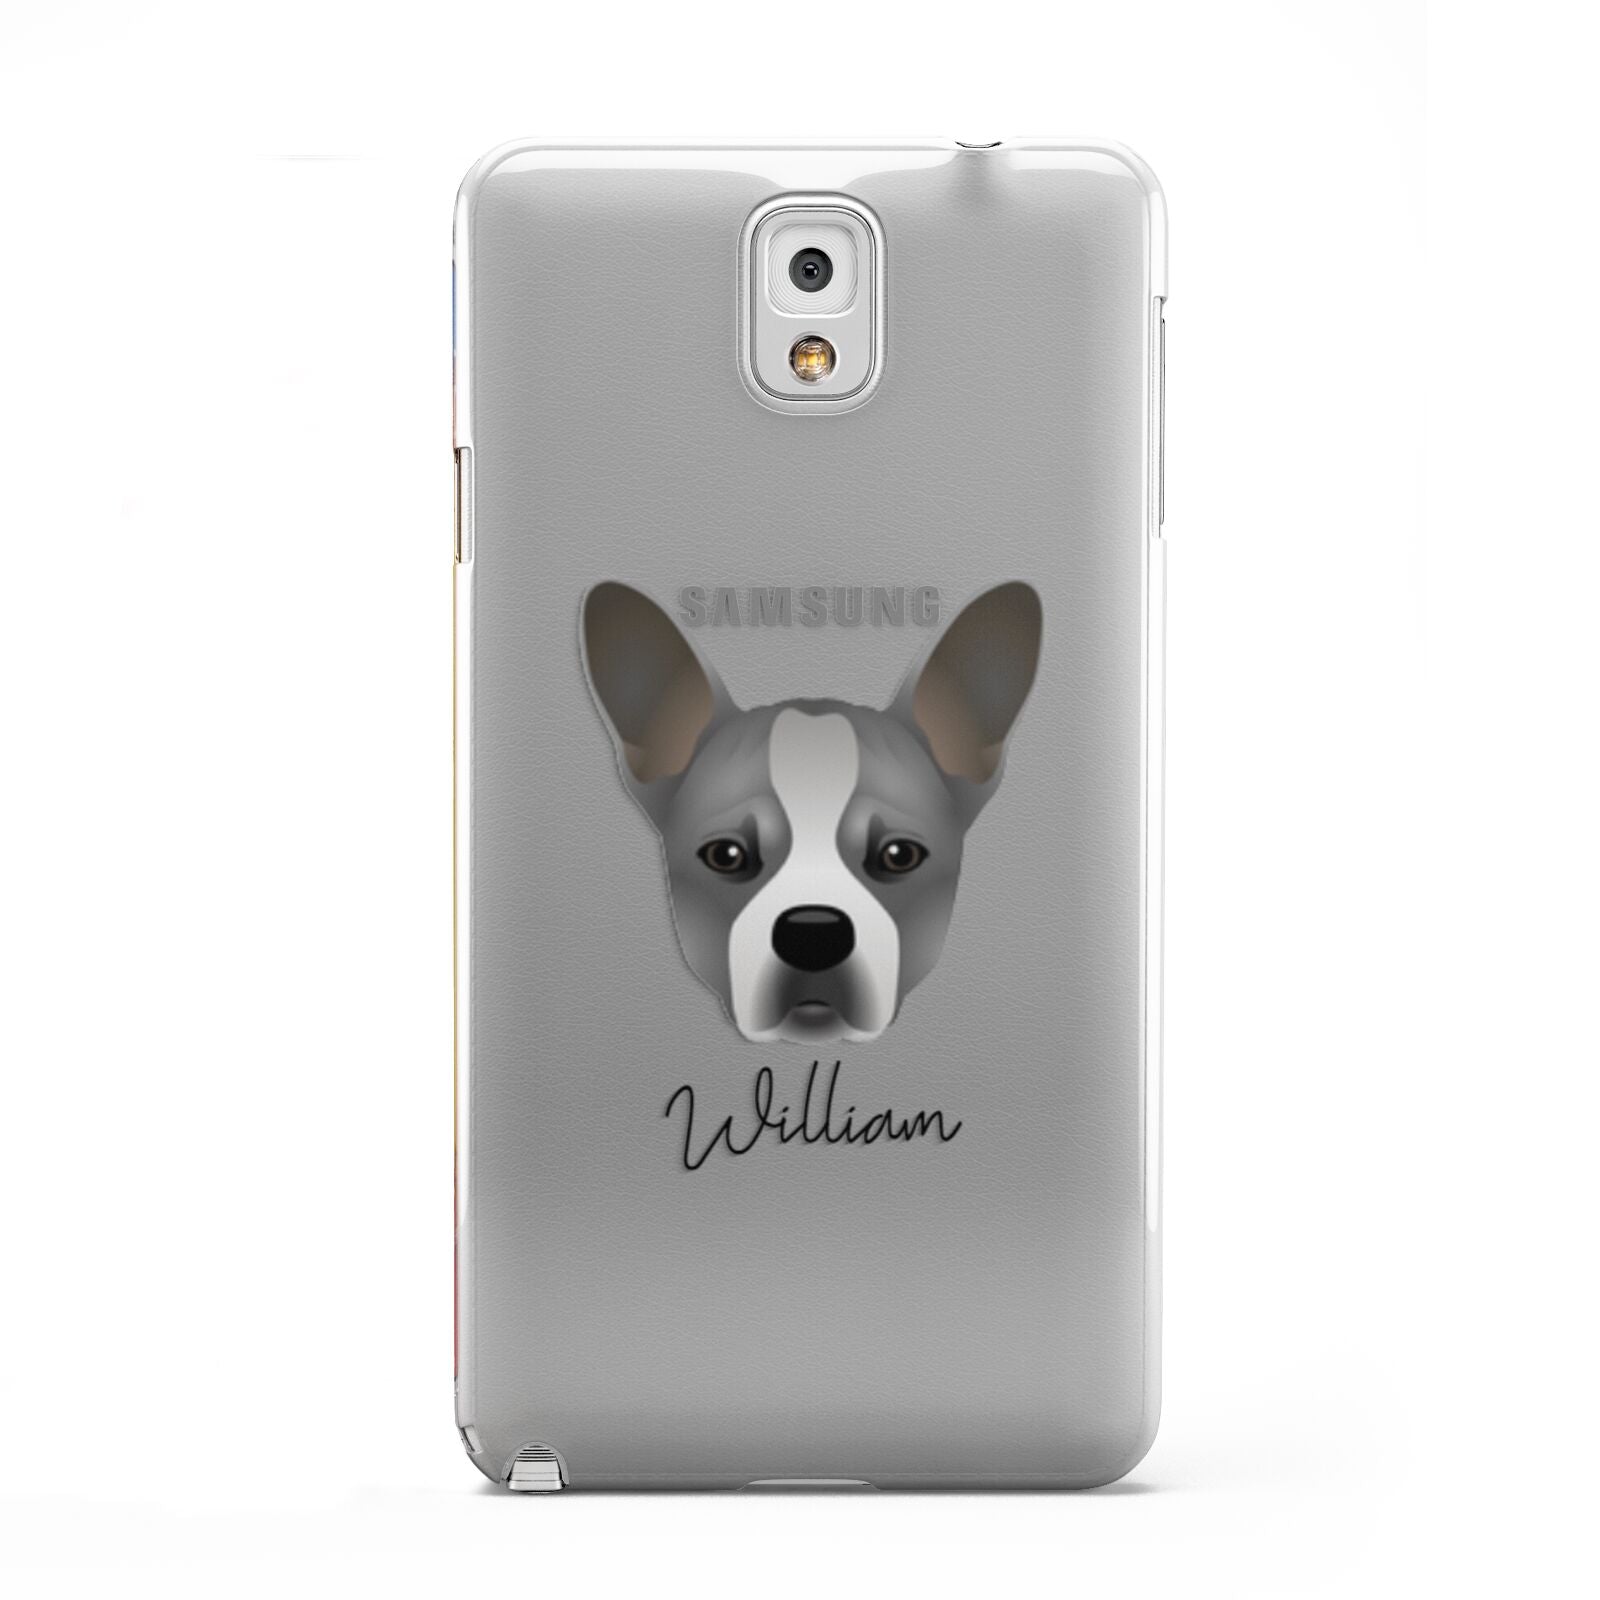 French Bull Jack Personalised Samsung Galaxy Note 3 Case